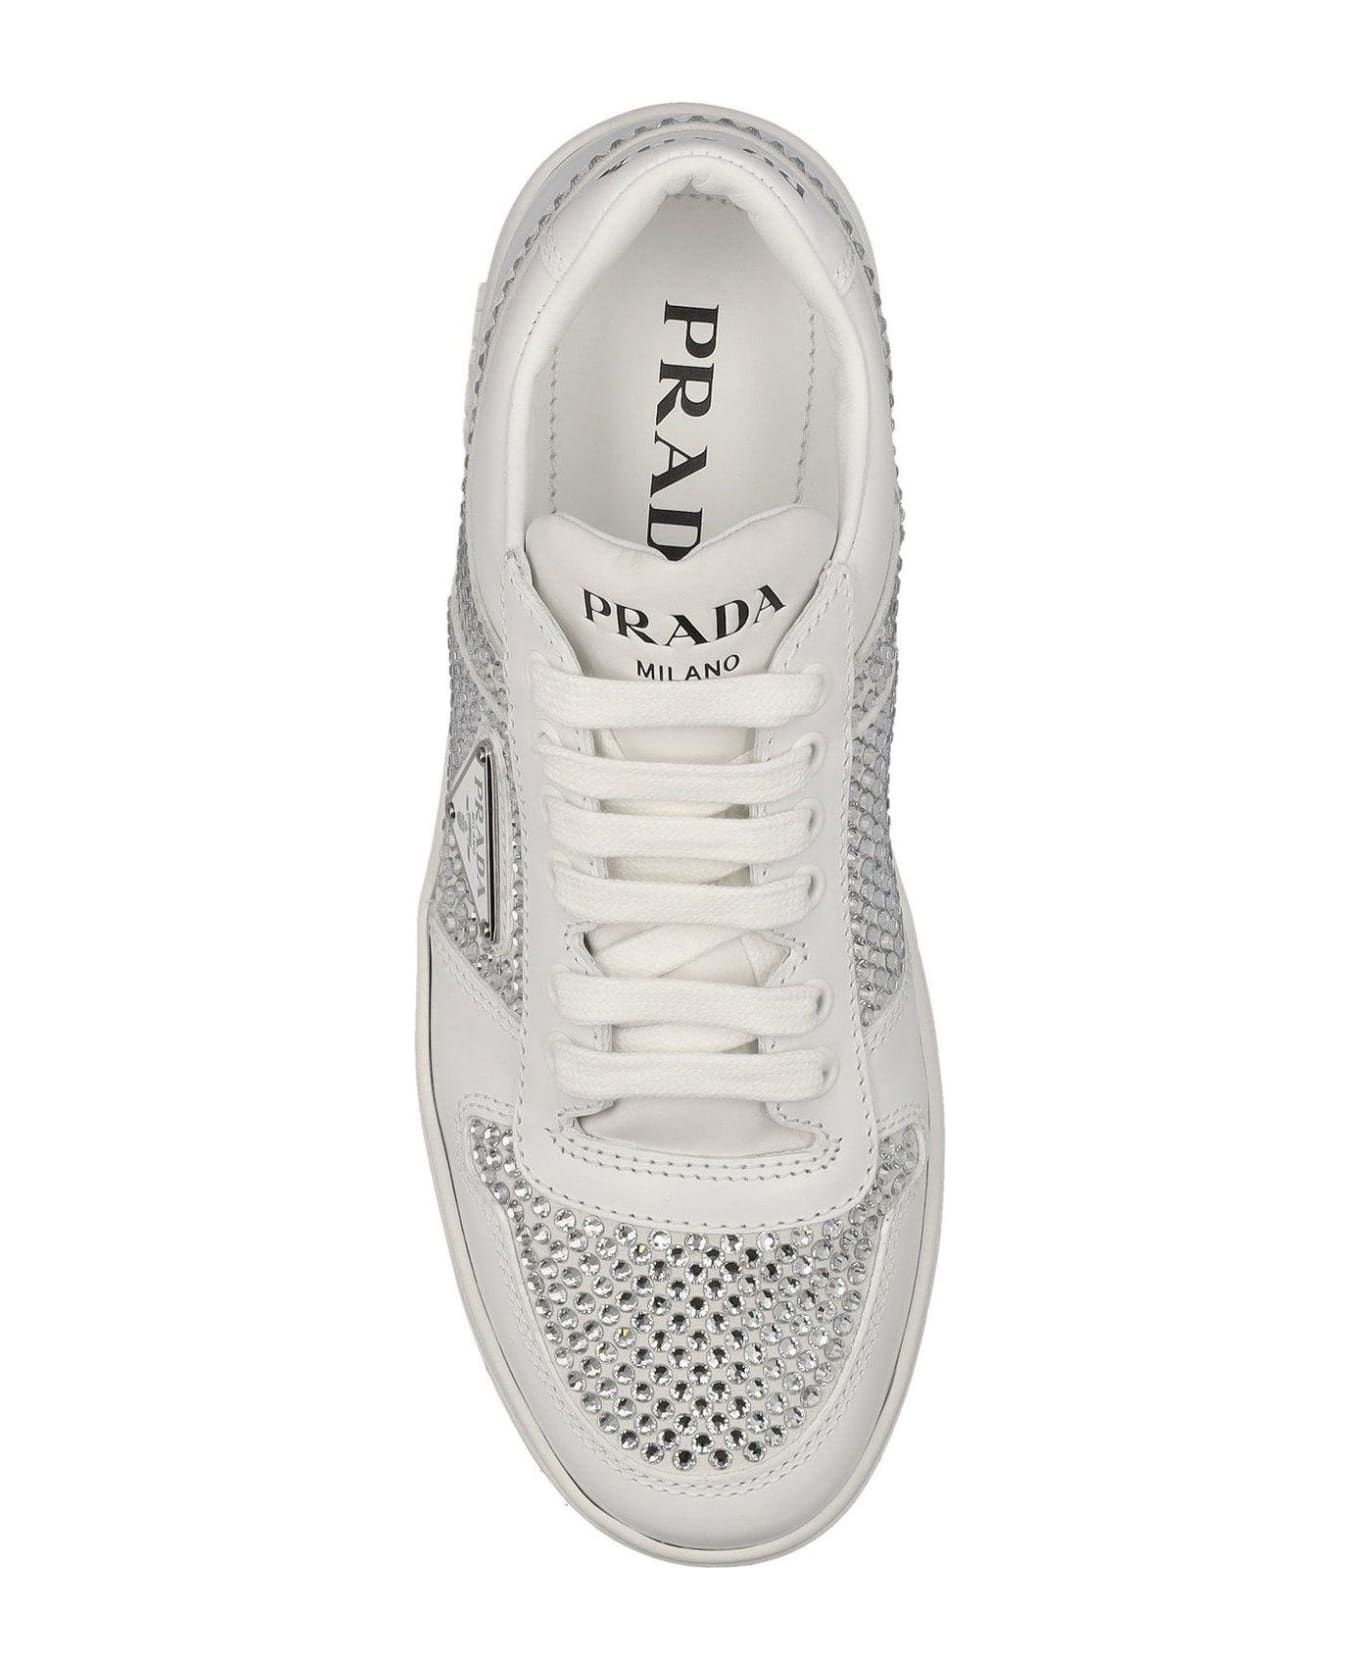 Prada Embellished Lace-up Sneakers - WHITE スニーカー